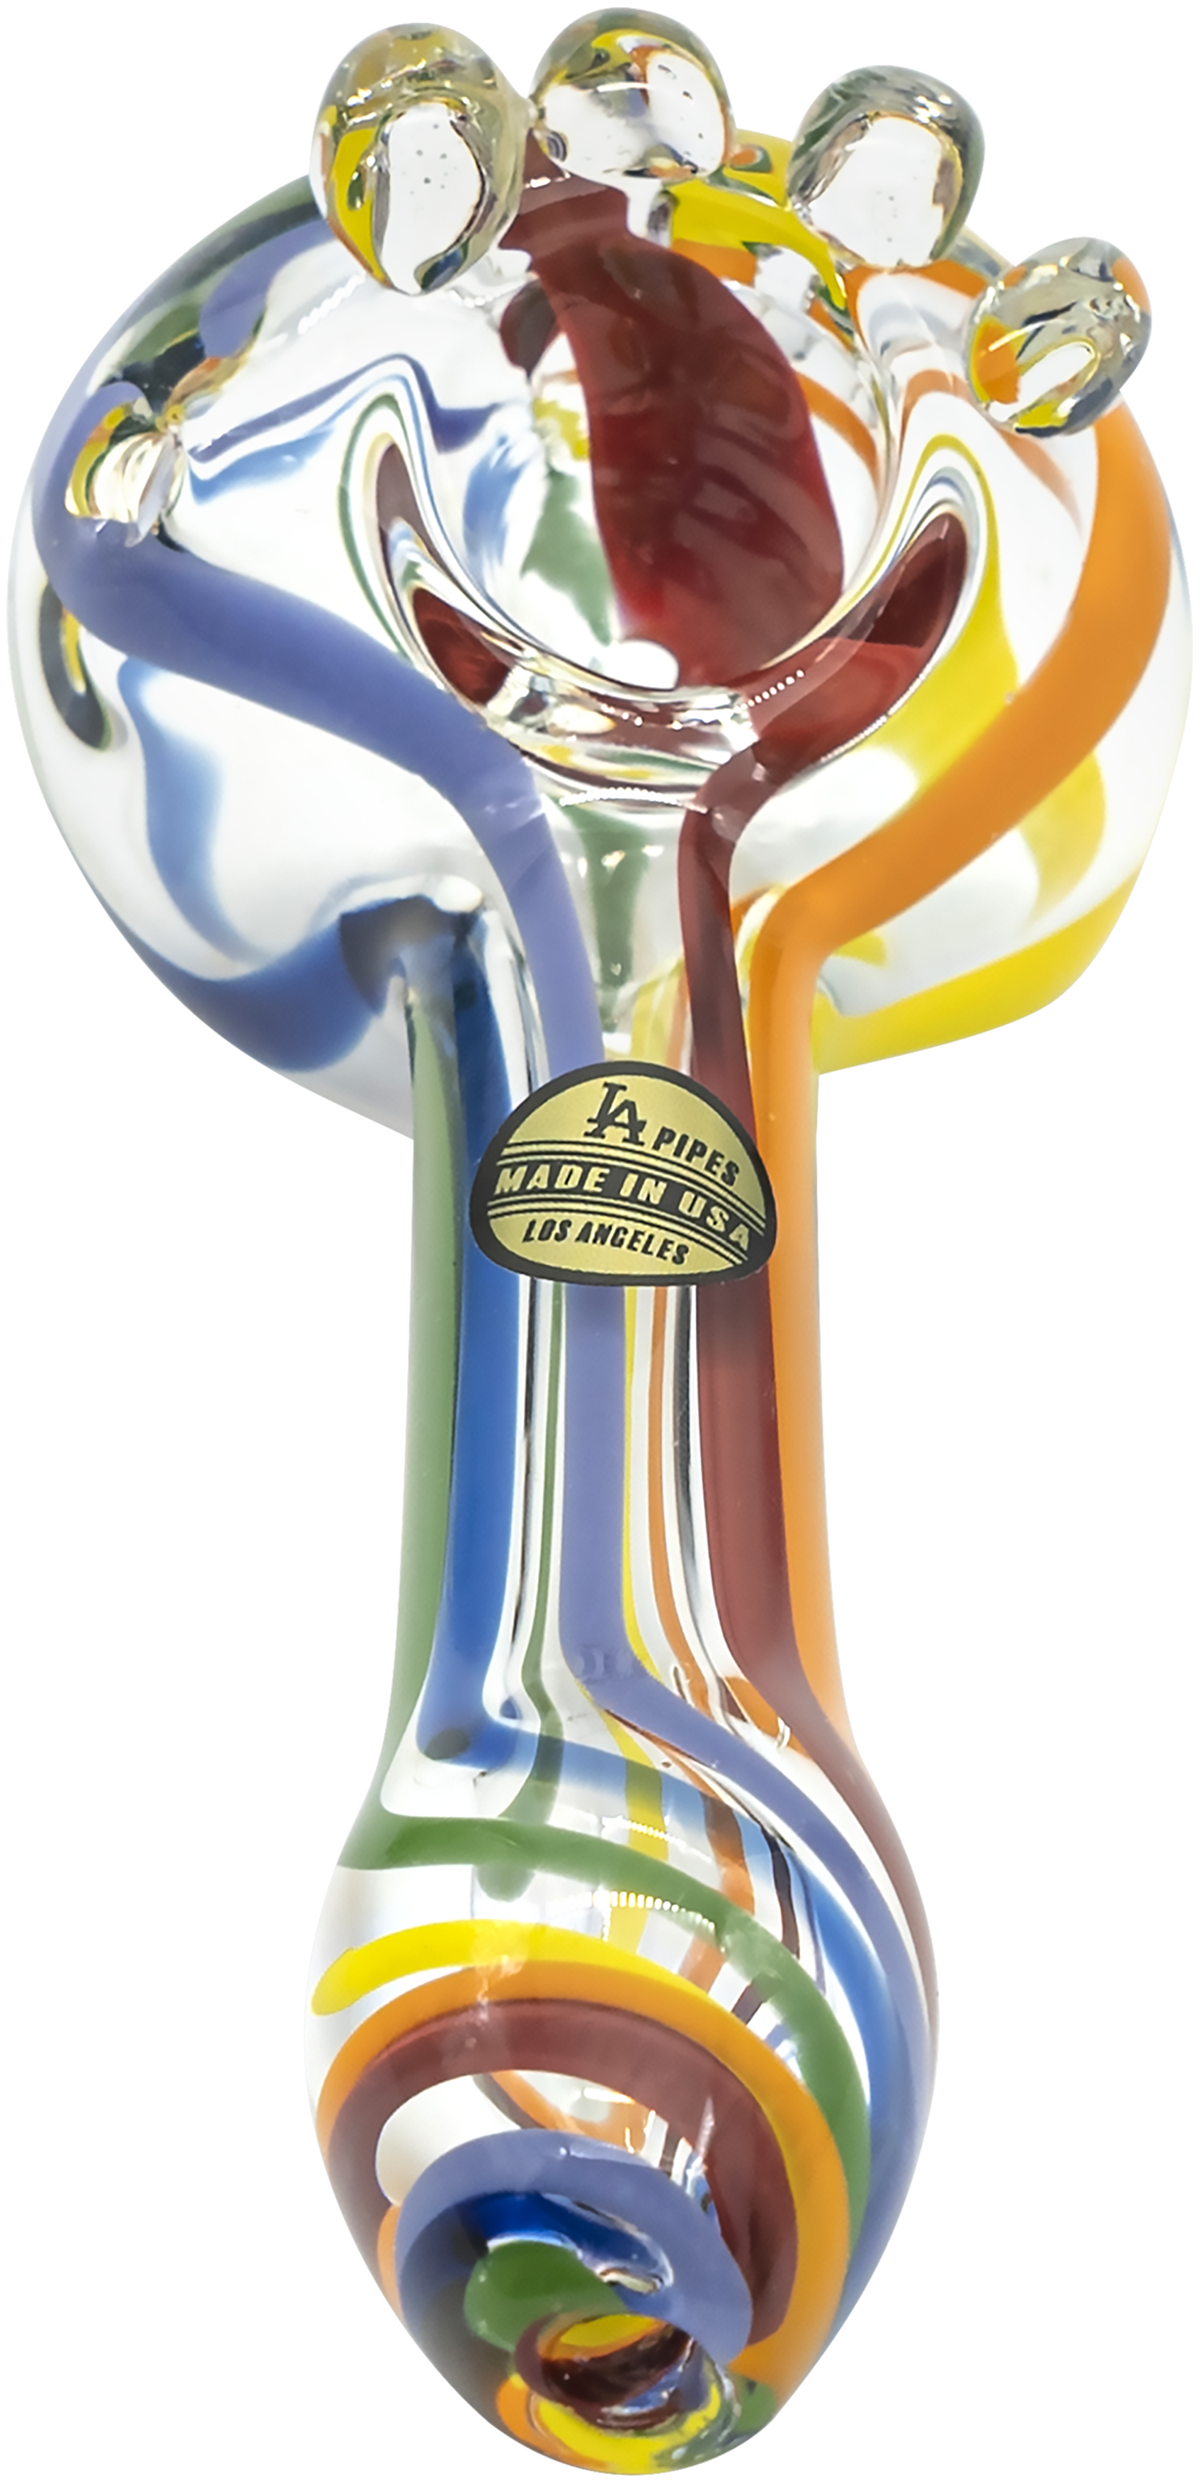 LA Pipes Rainbow Ripper Spoon Pipe for Dry Herbs, Borosilicate Glass, Front View